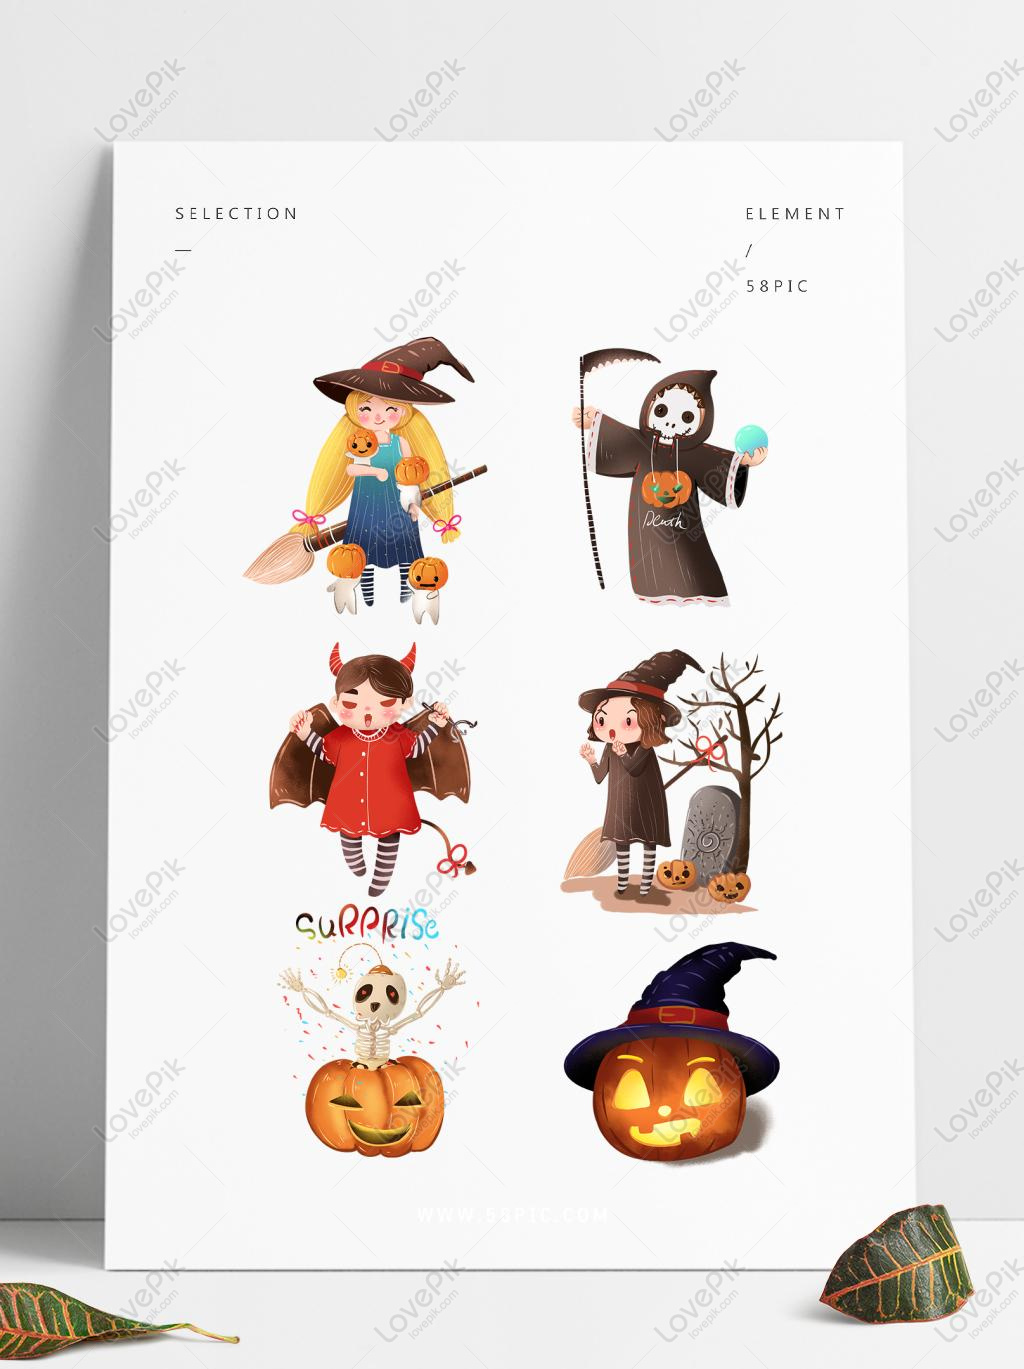 Halloween Cute Decorative Illustration PNG Image Free Download PSD images  free download_1369 × 1024 px - Lovepik